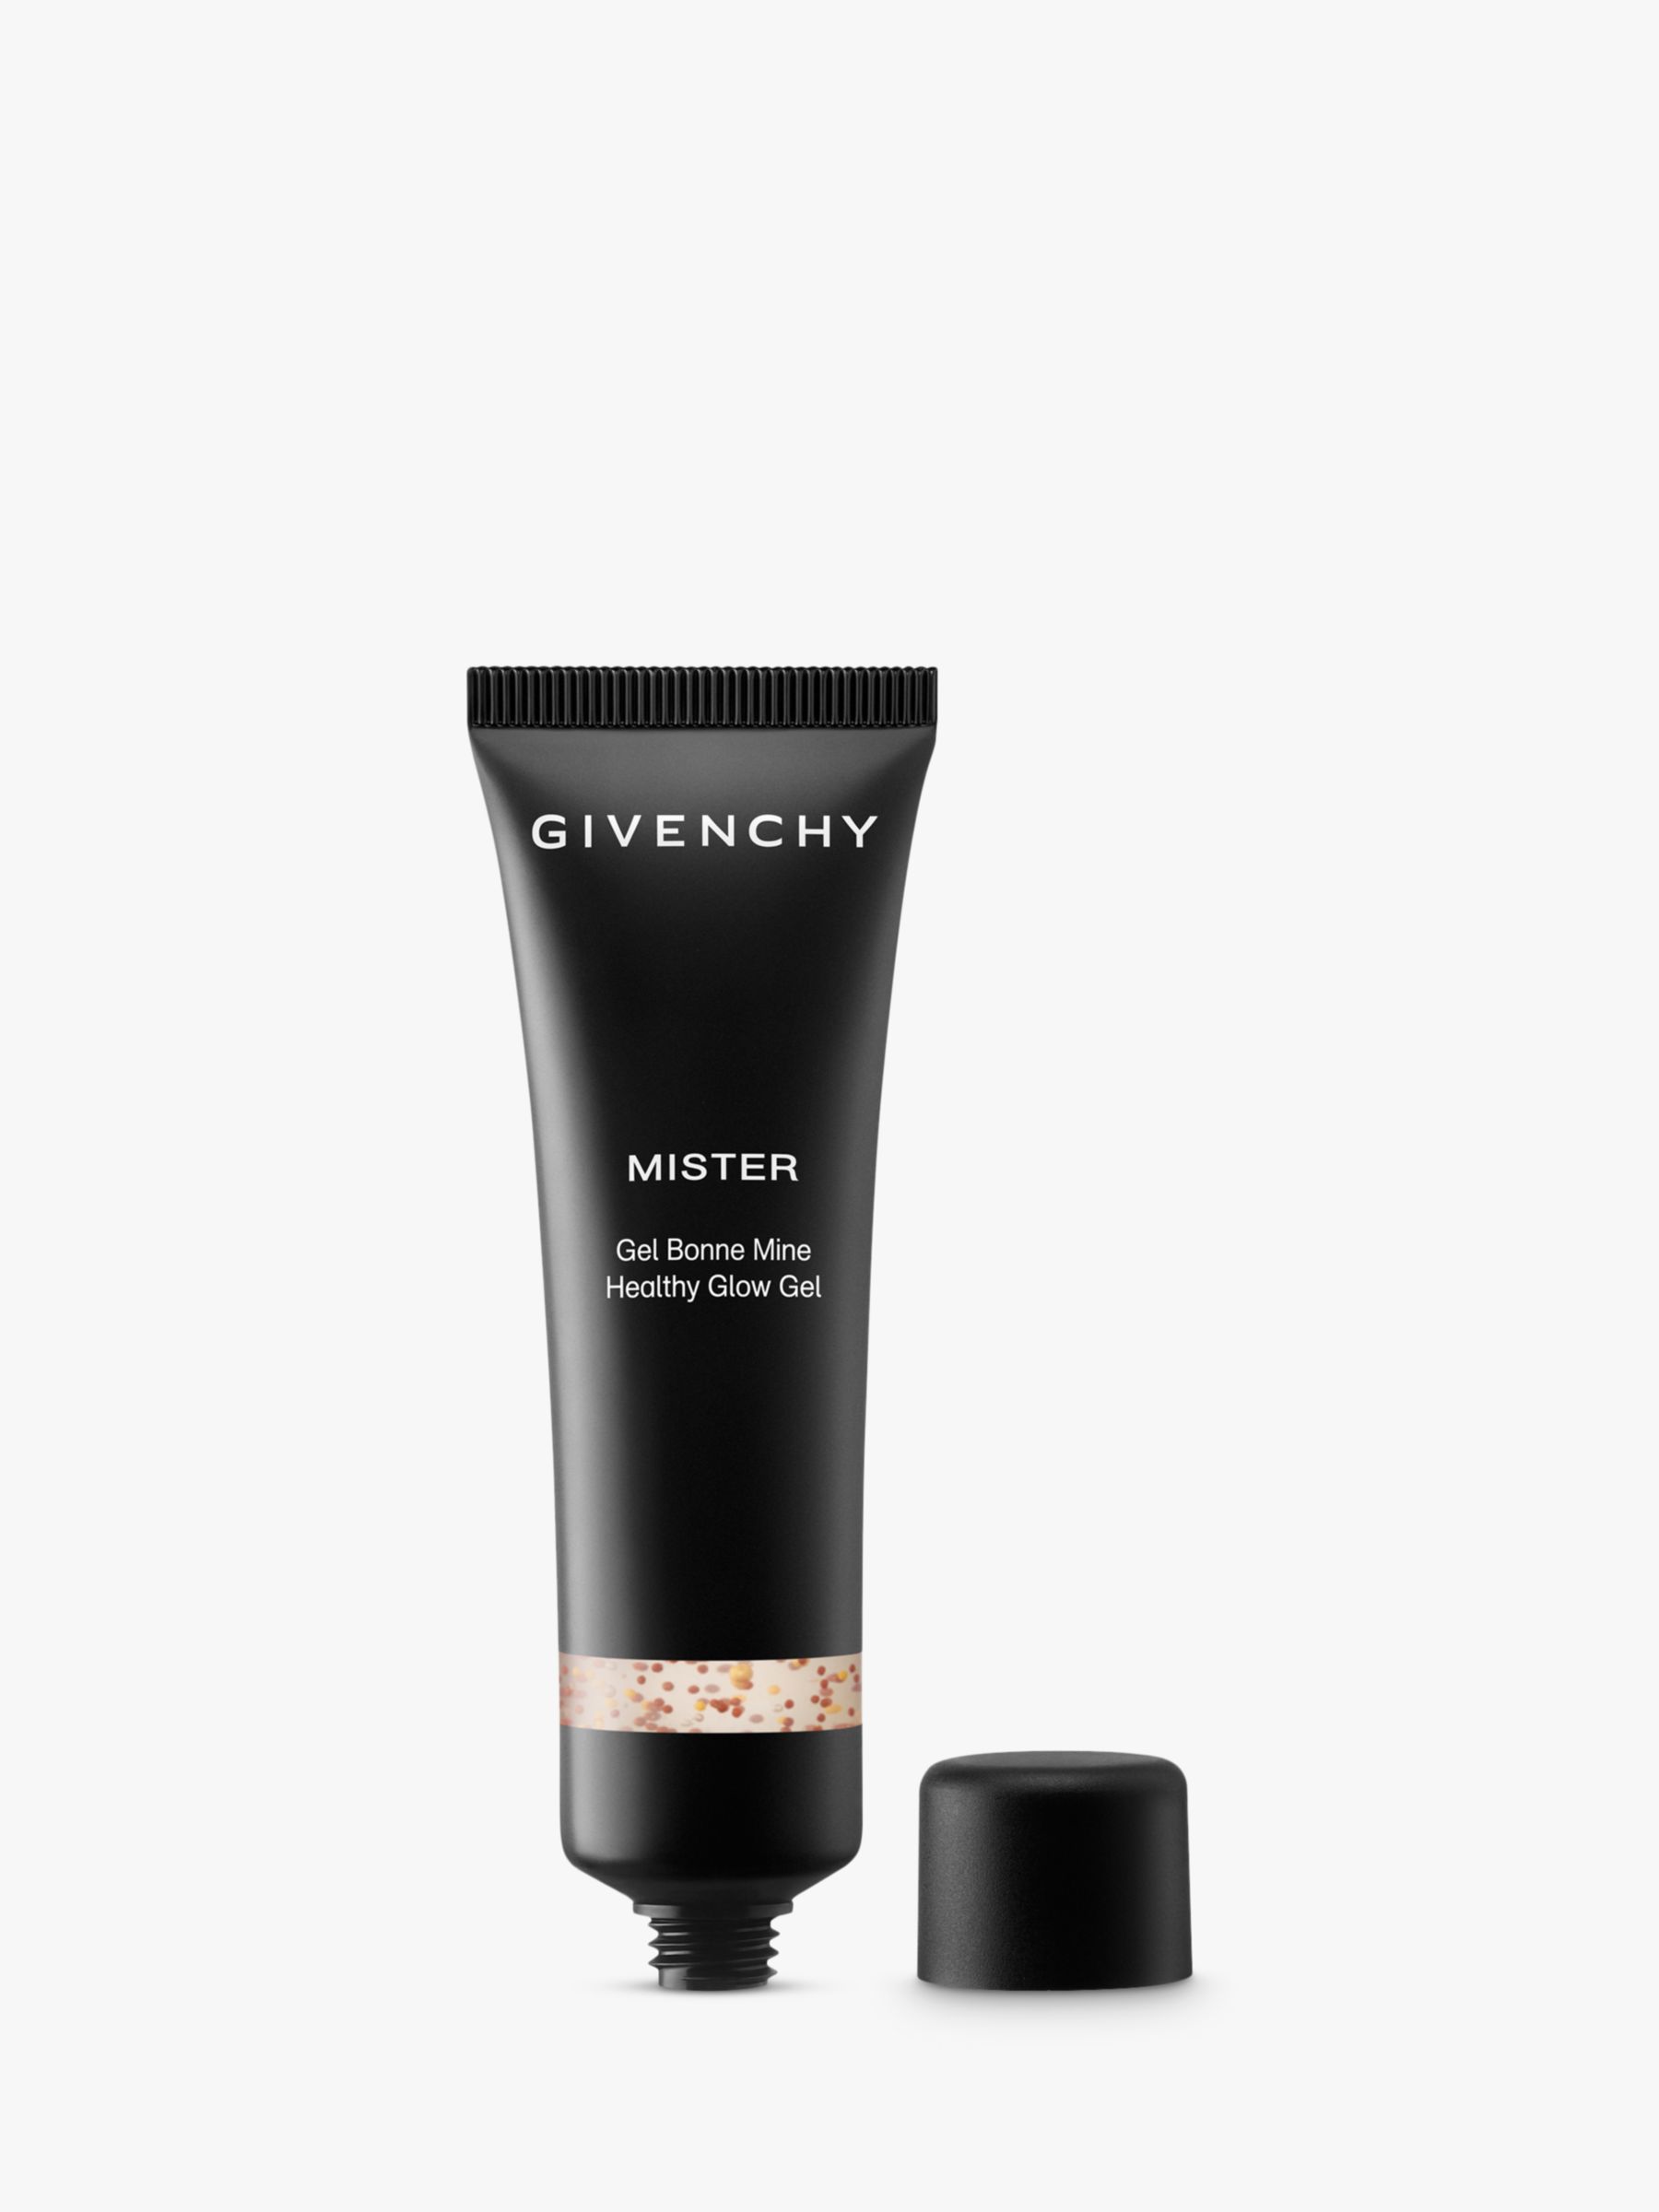 Givenchy Mister Healthy Glow Gel, 00 Universal Tan 2